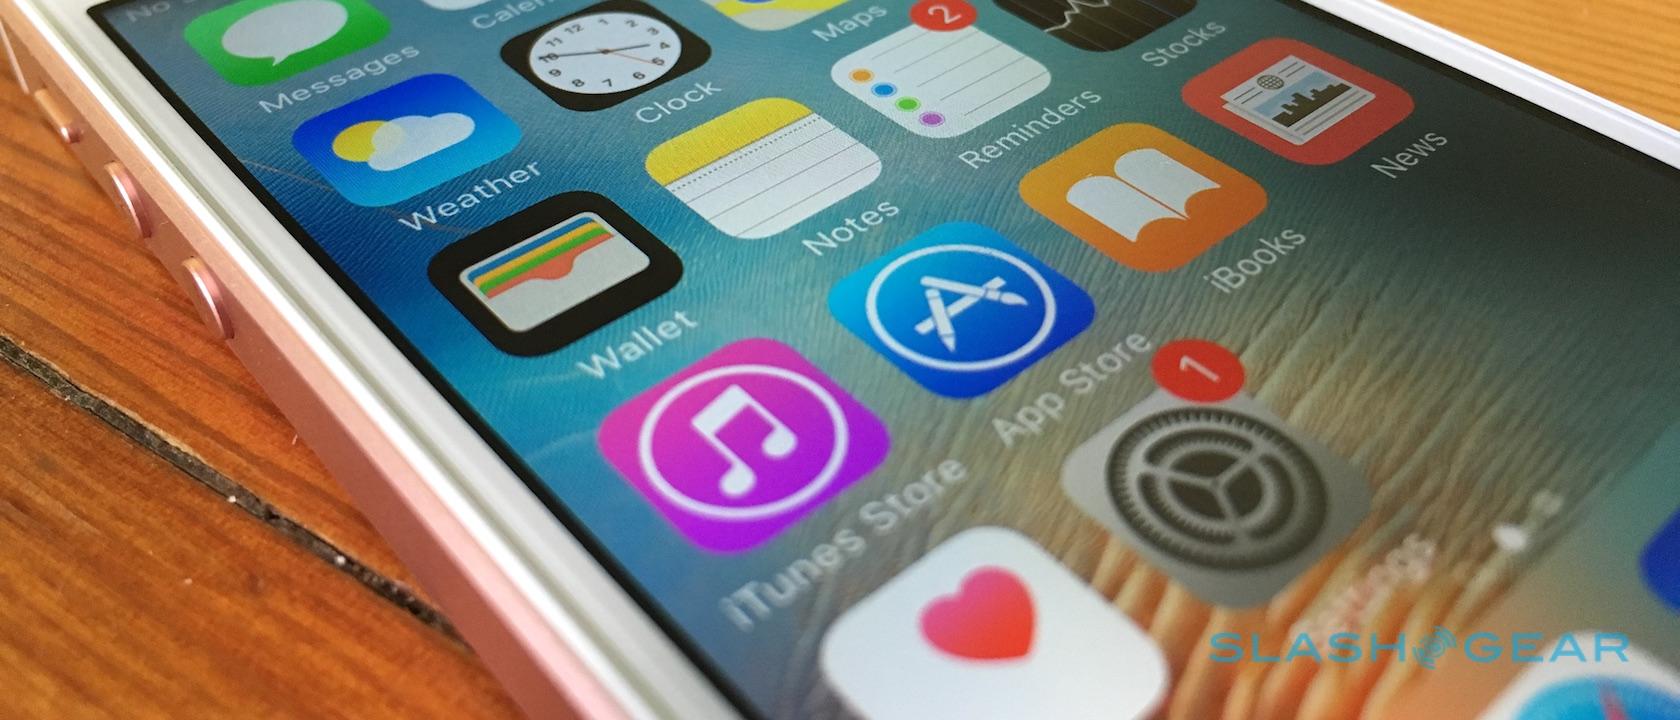 iOS App Store may soon offer up personalized app recommendations